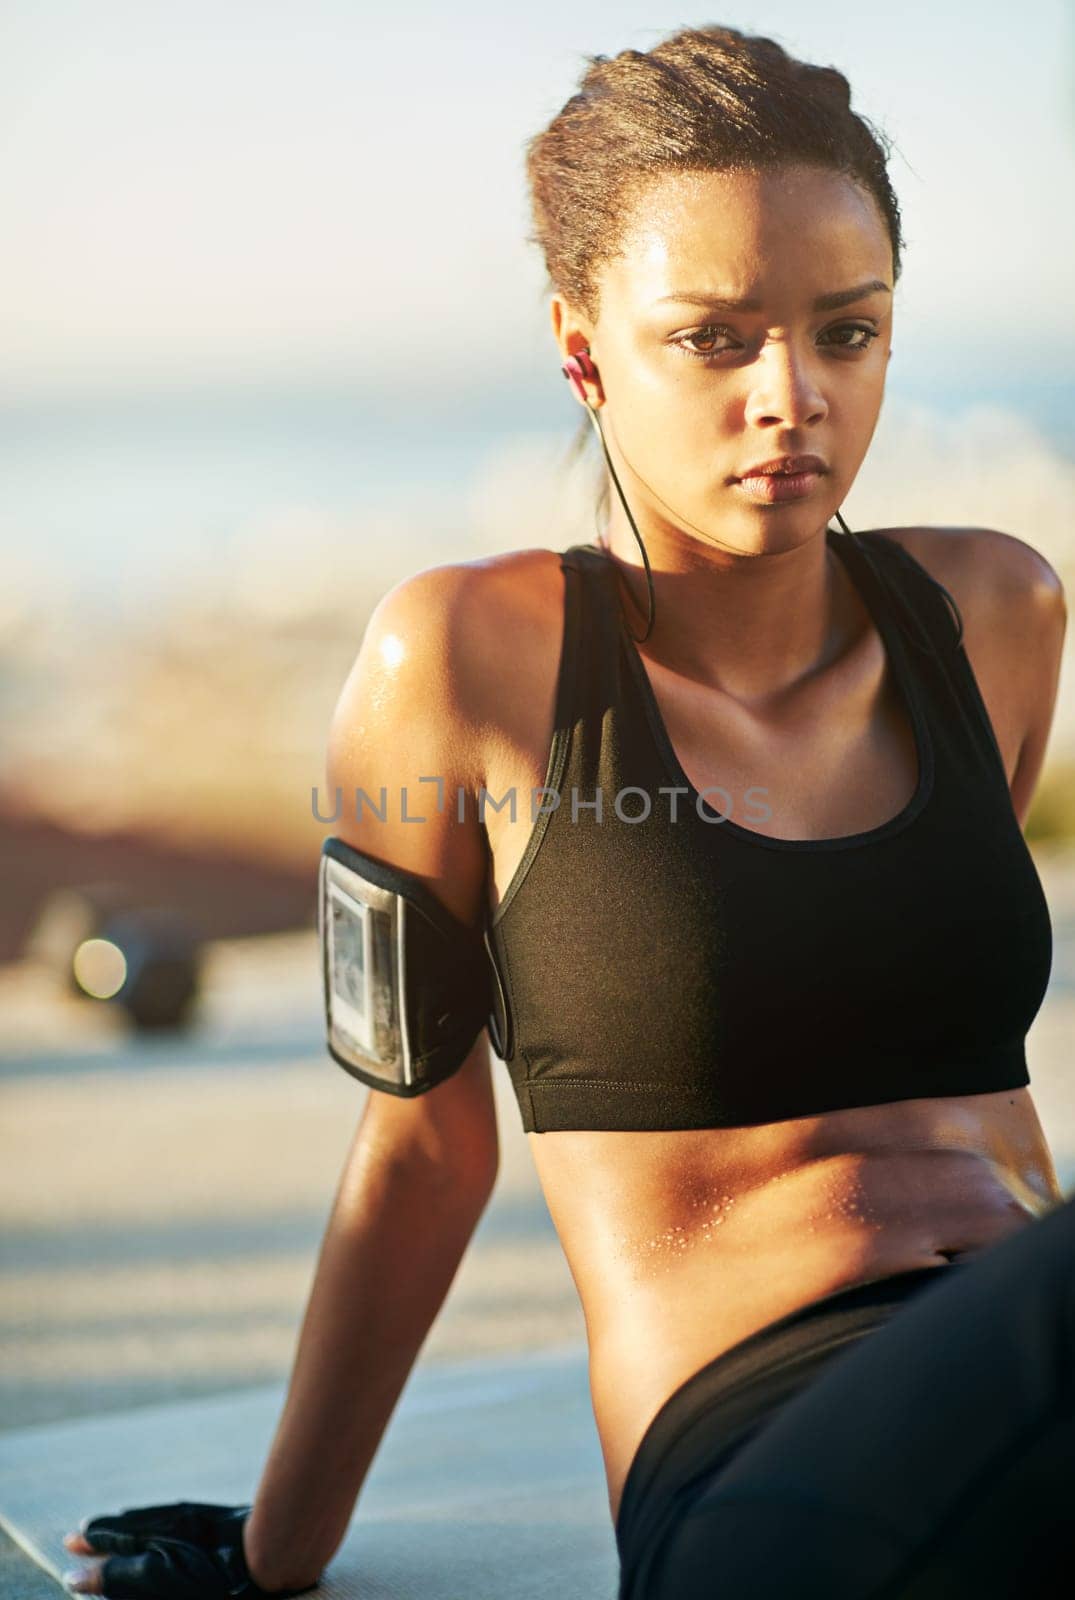 Workout, portrait and woman at sunrise with music or podcast for fitness, health and relax in nature. Earphones, sports and female athlete in park for exercise, wellbeing and training in summer.